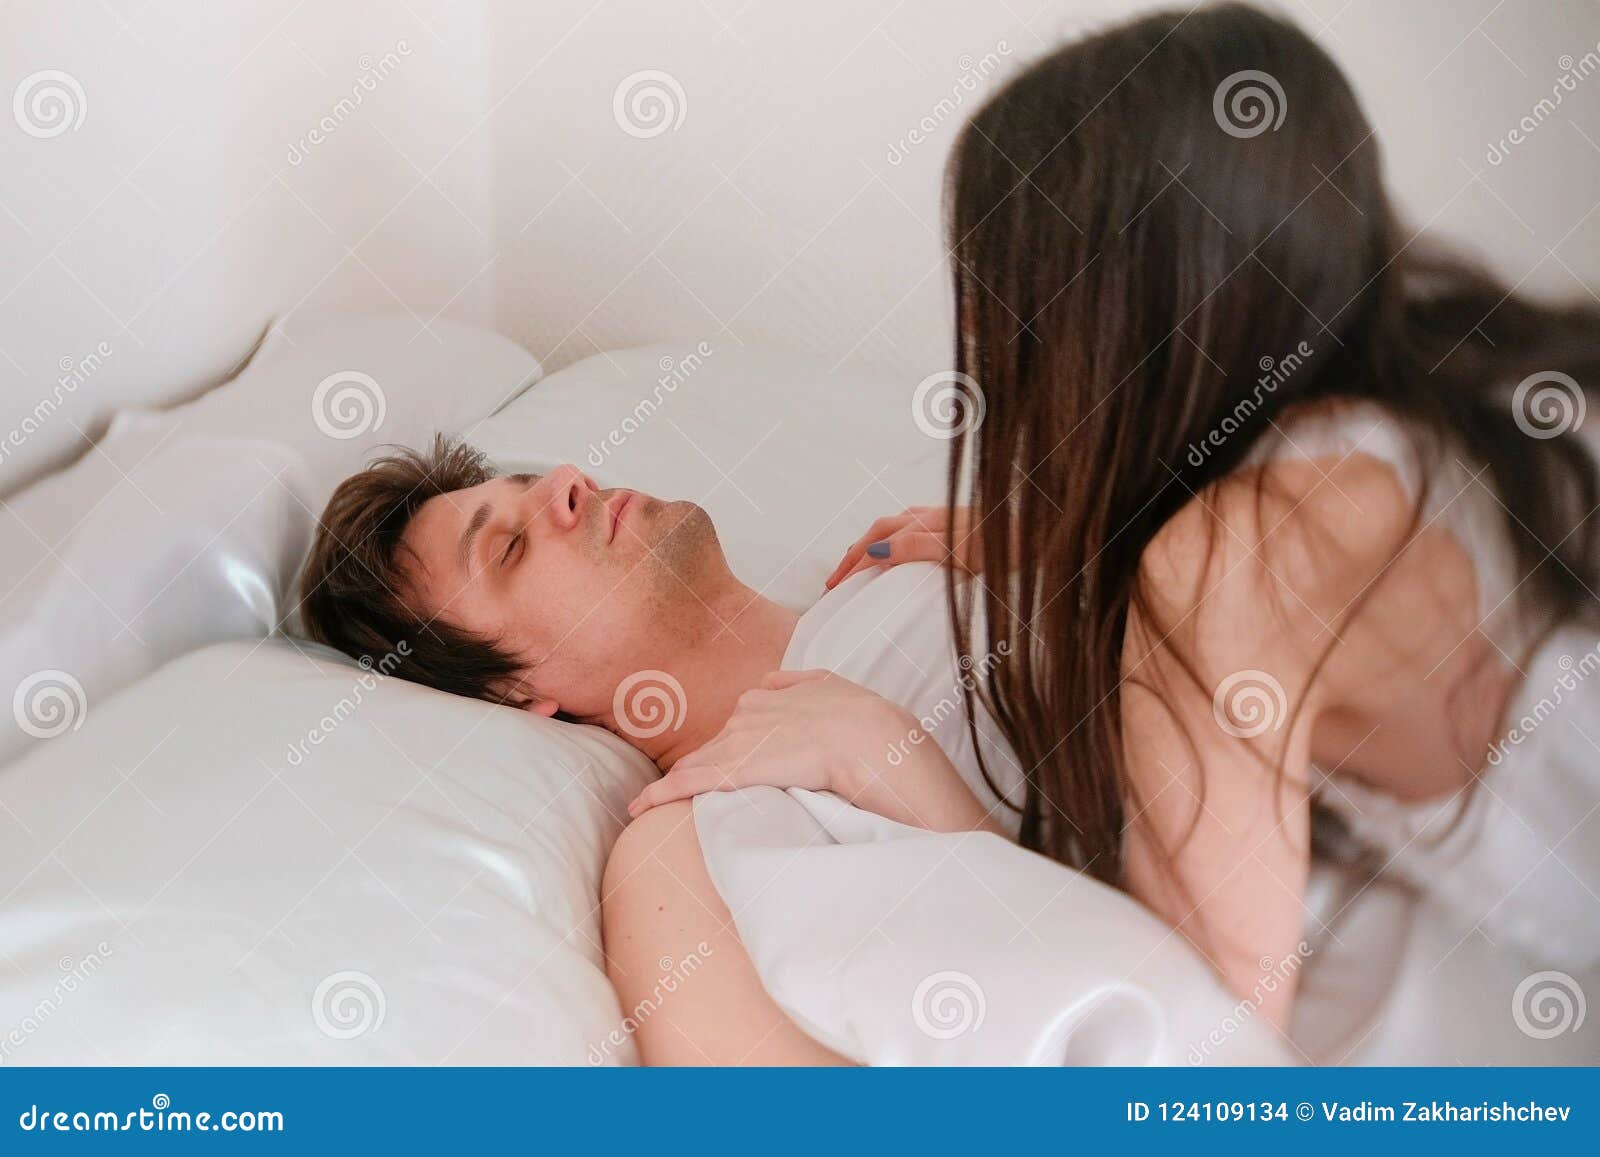 Husband and Wife Have Sex in the Morning photo picture